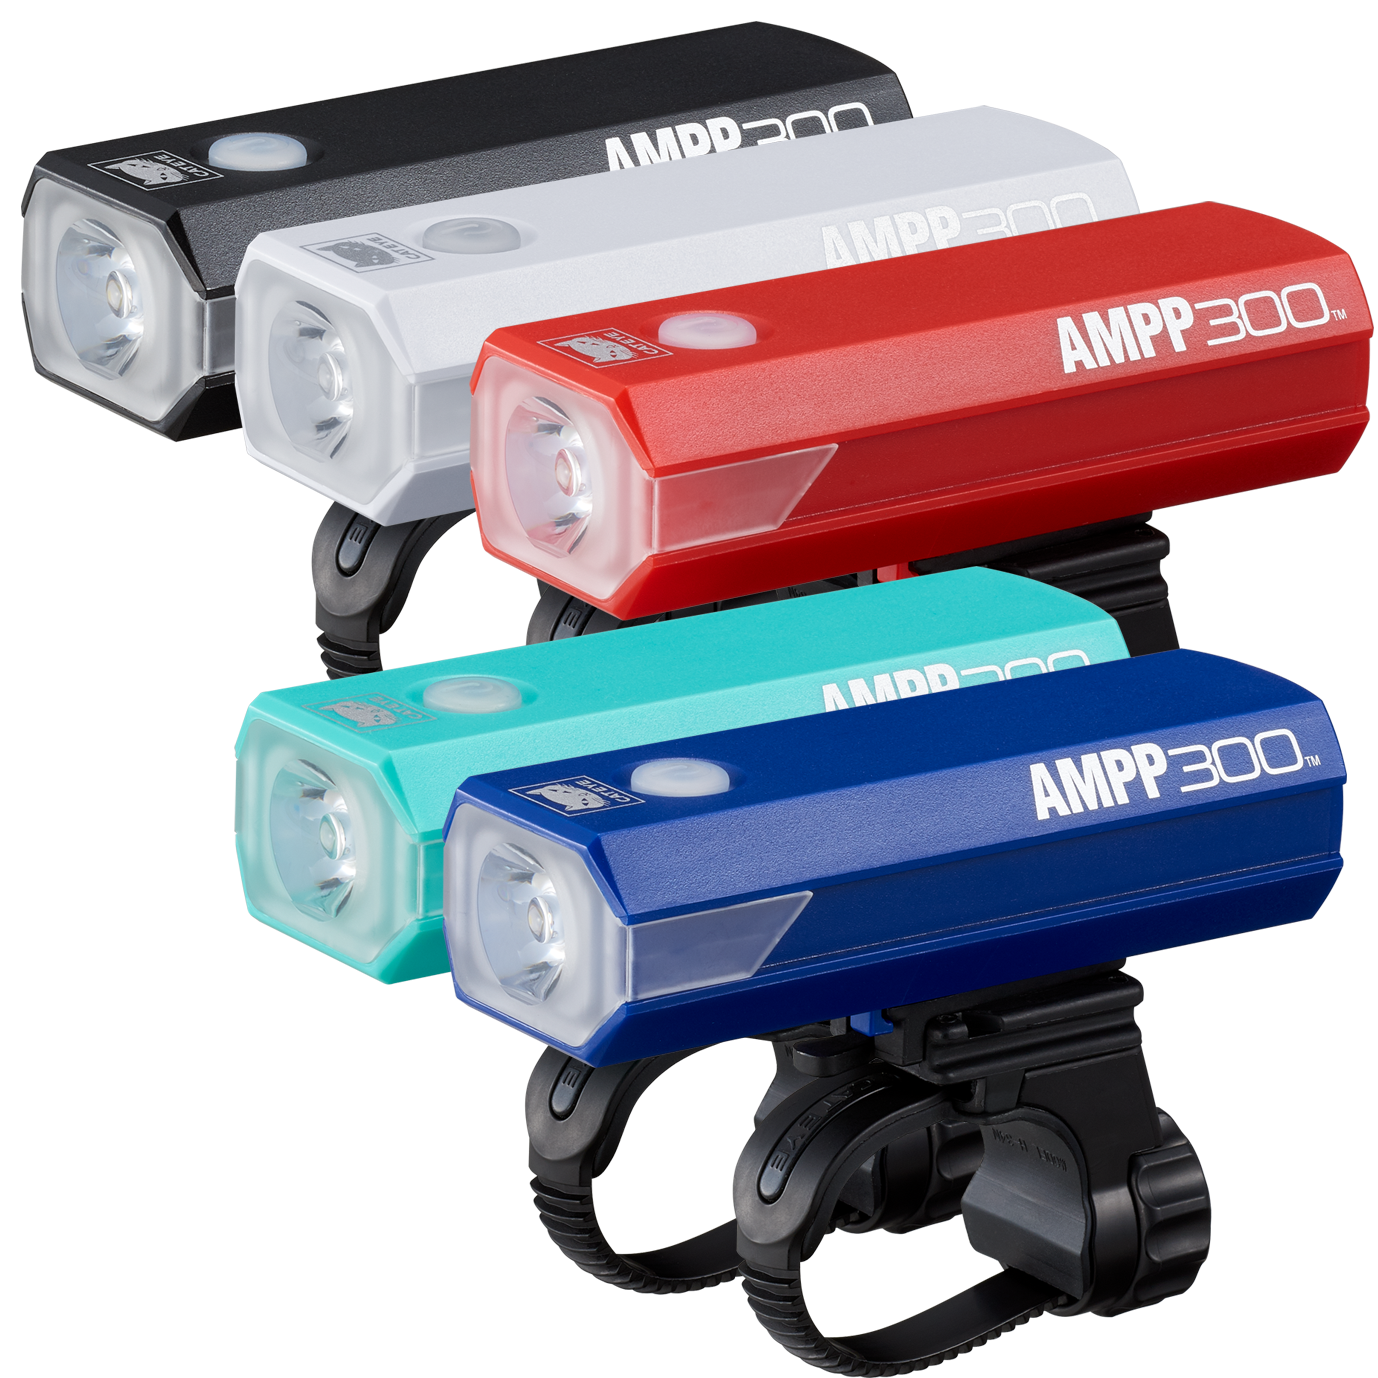 CATEYE AMPP 300 Front Light Limited Colours